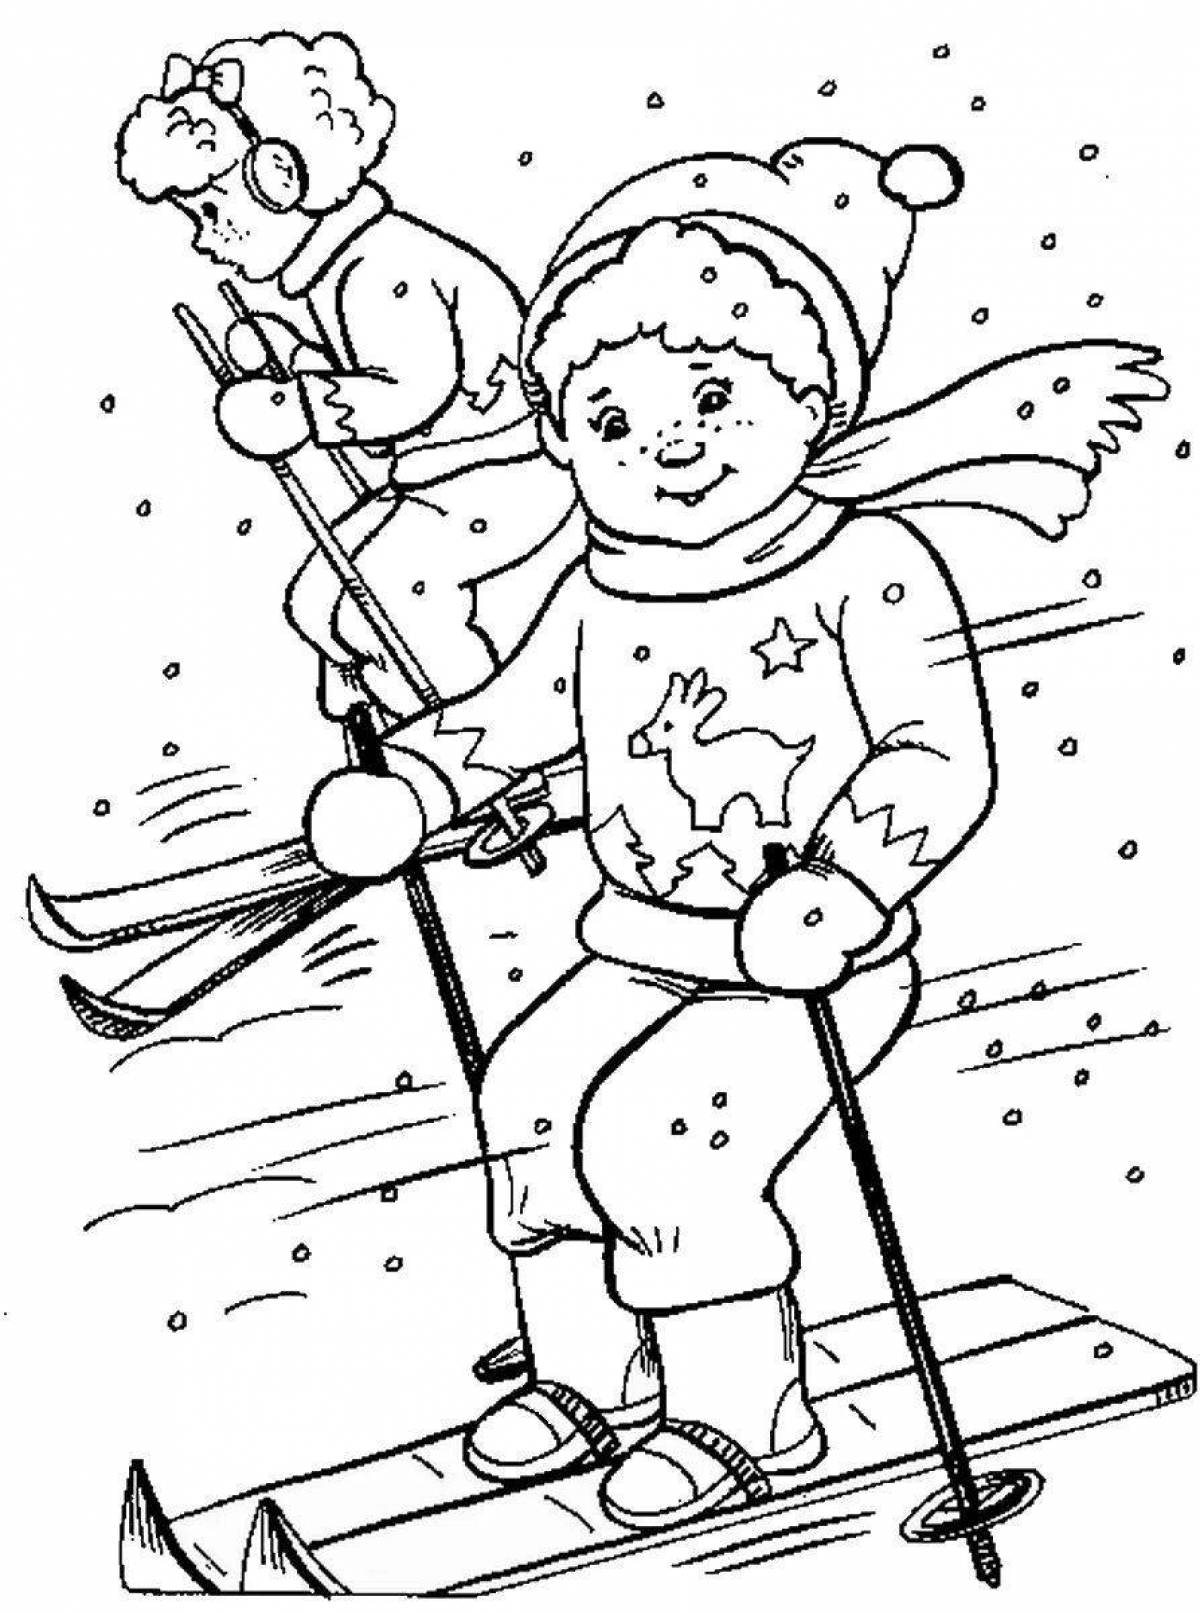 Dynamic skier coloring book for 5-6 year olds